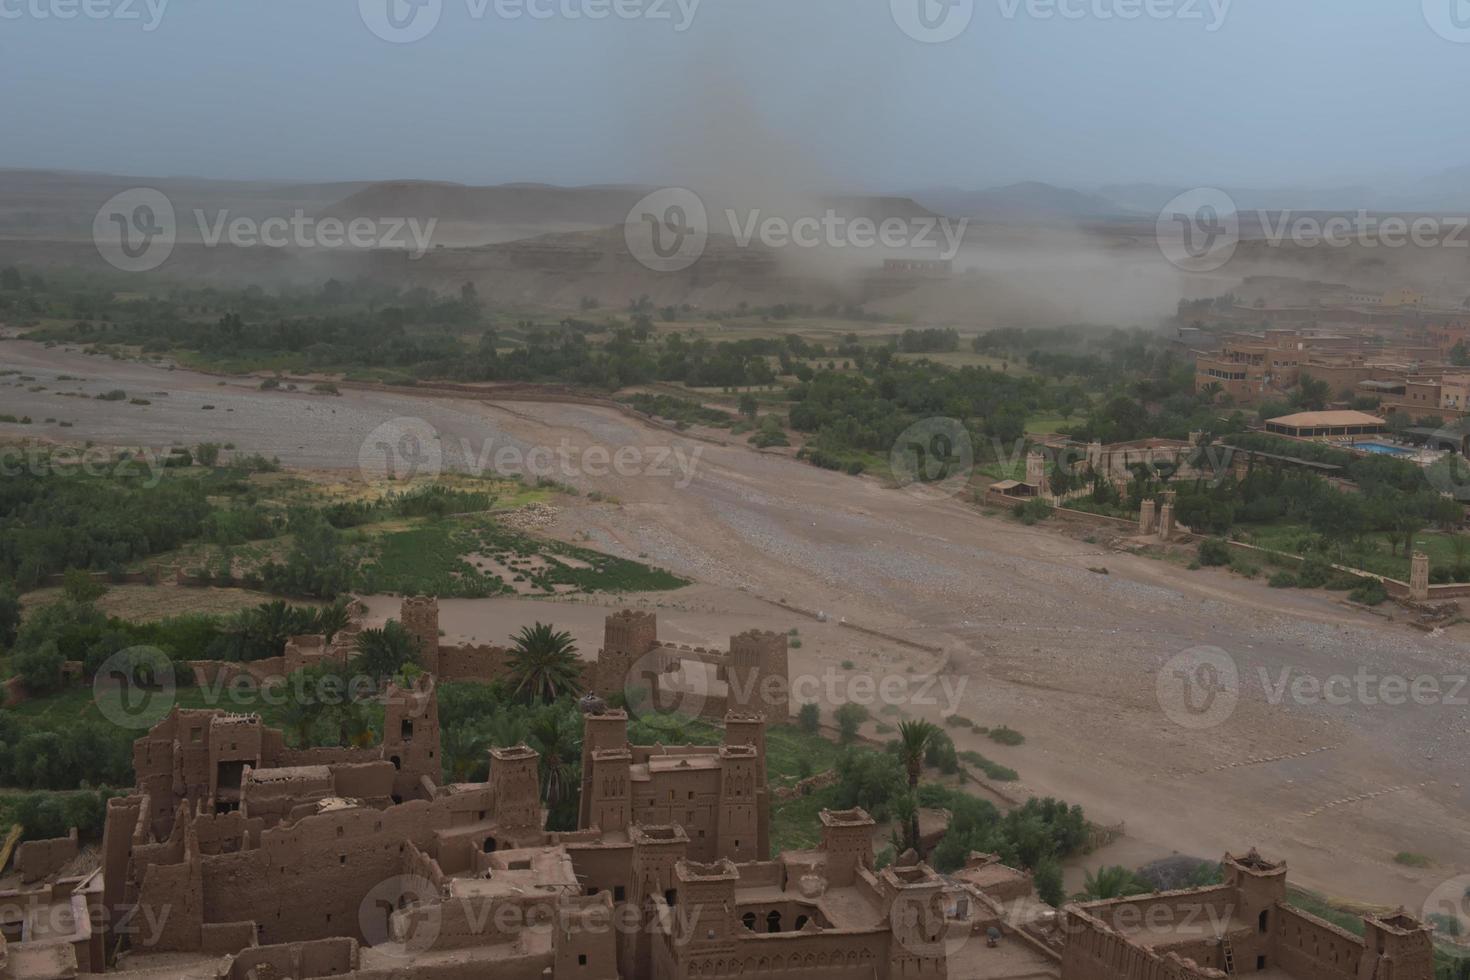 A sand storm coming to Ait Benhaddou Maroc location of gladiator movie photo